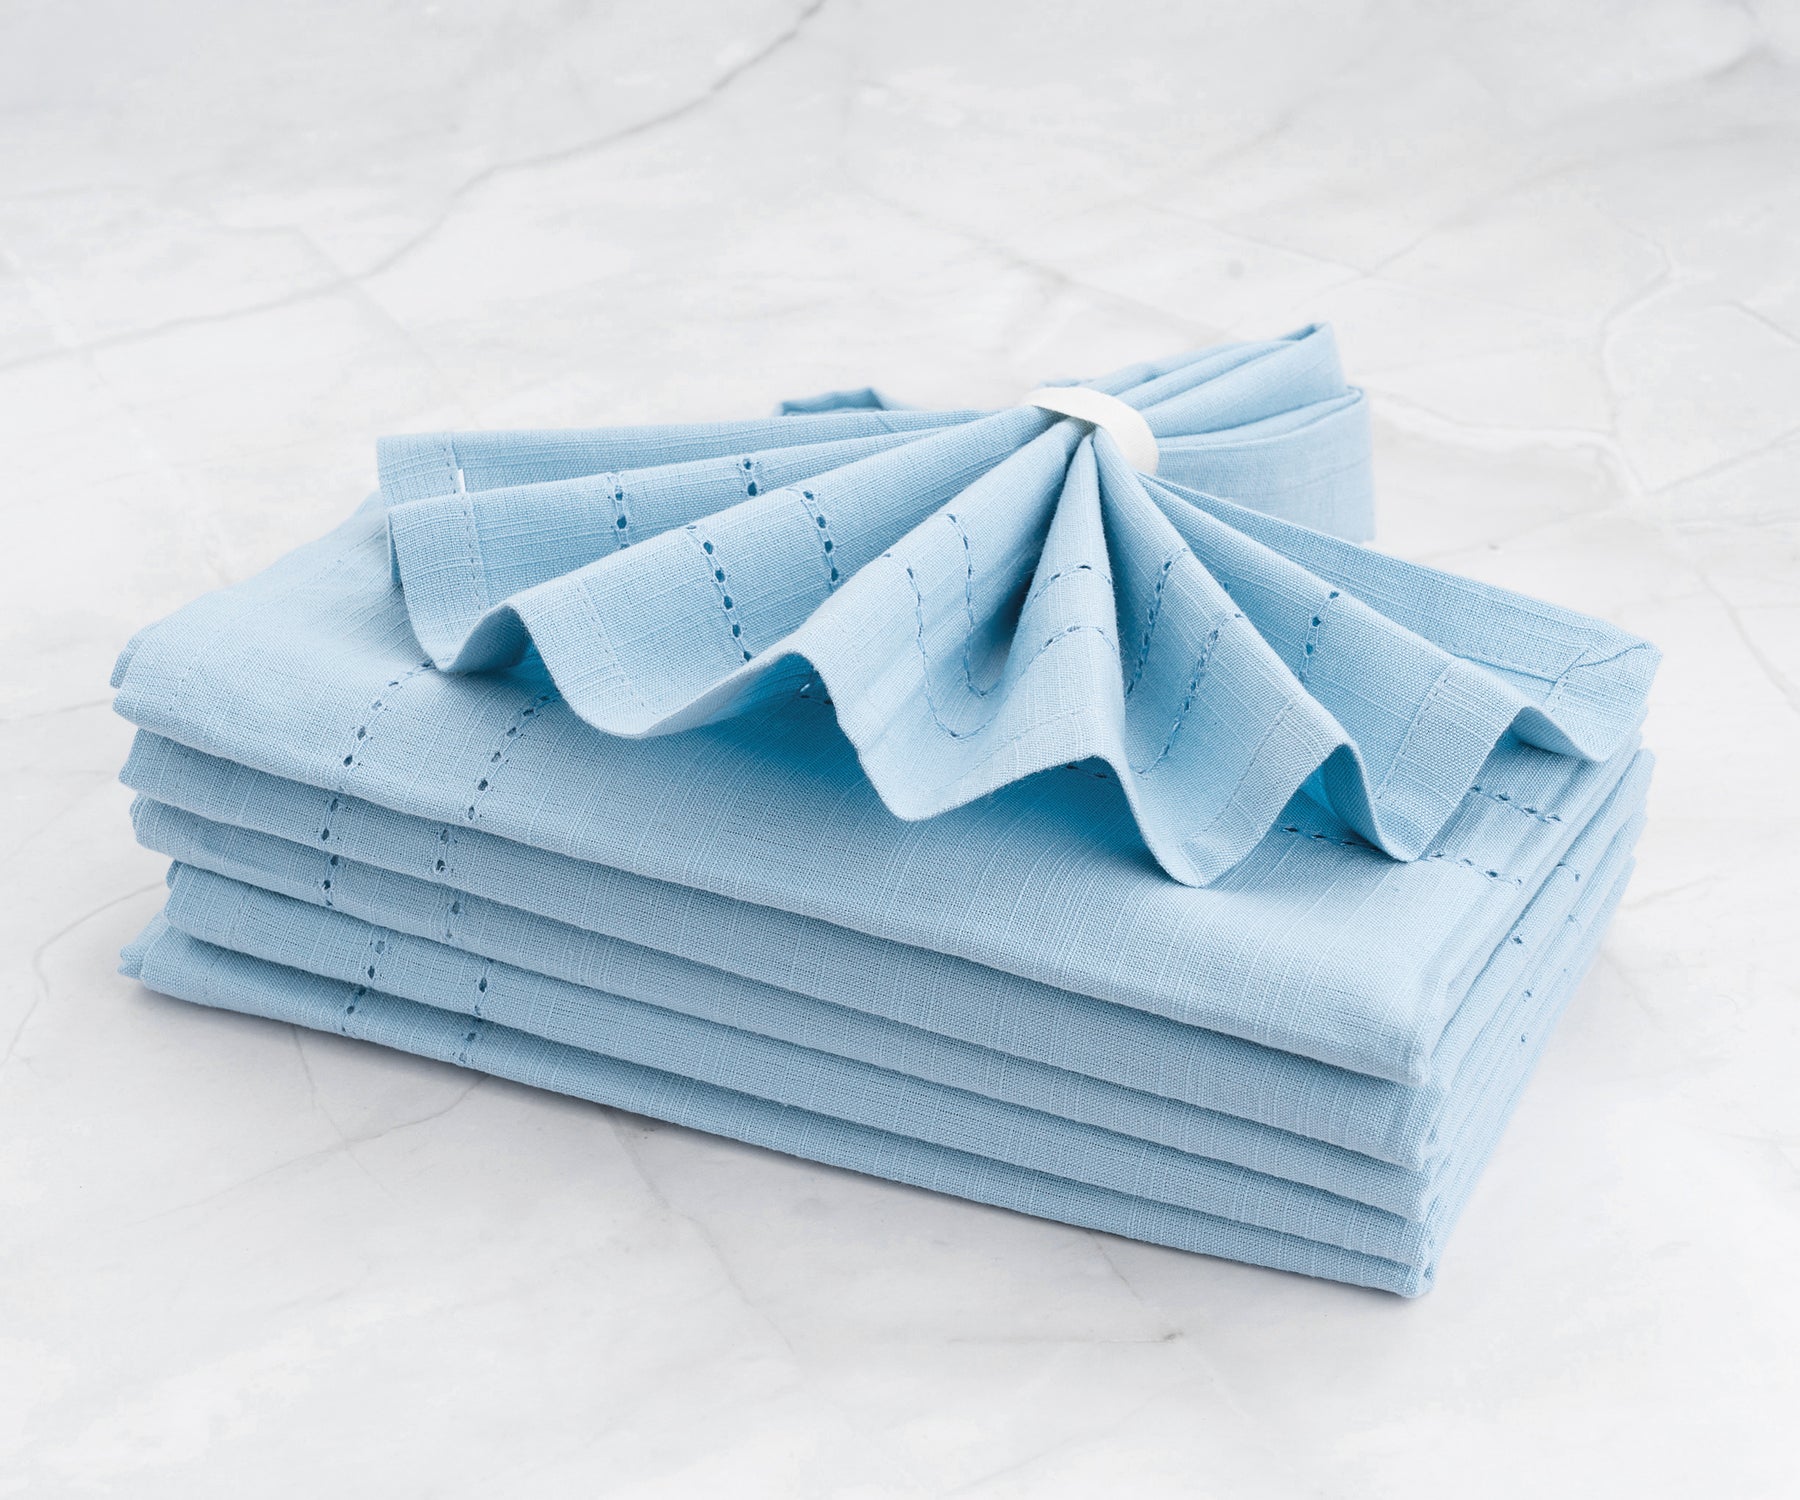 All Cotton and Linen Cloth Napkins Set of 6, Blue Napkins, Cotton Napkins, Light Blue Cloth Napkins, Blue Dinner Napkins, Cotton Cloth Napkins, Double